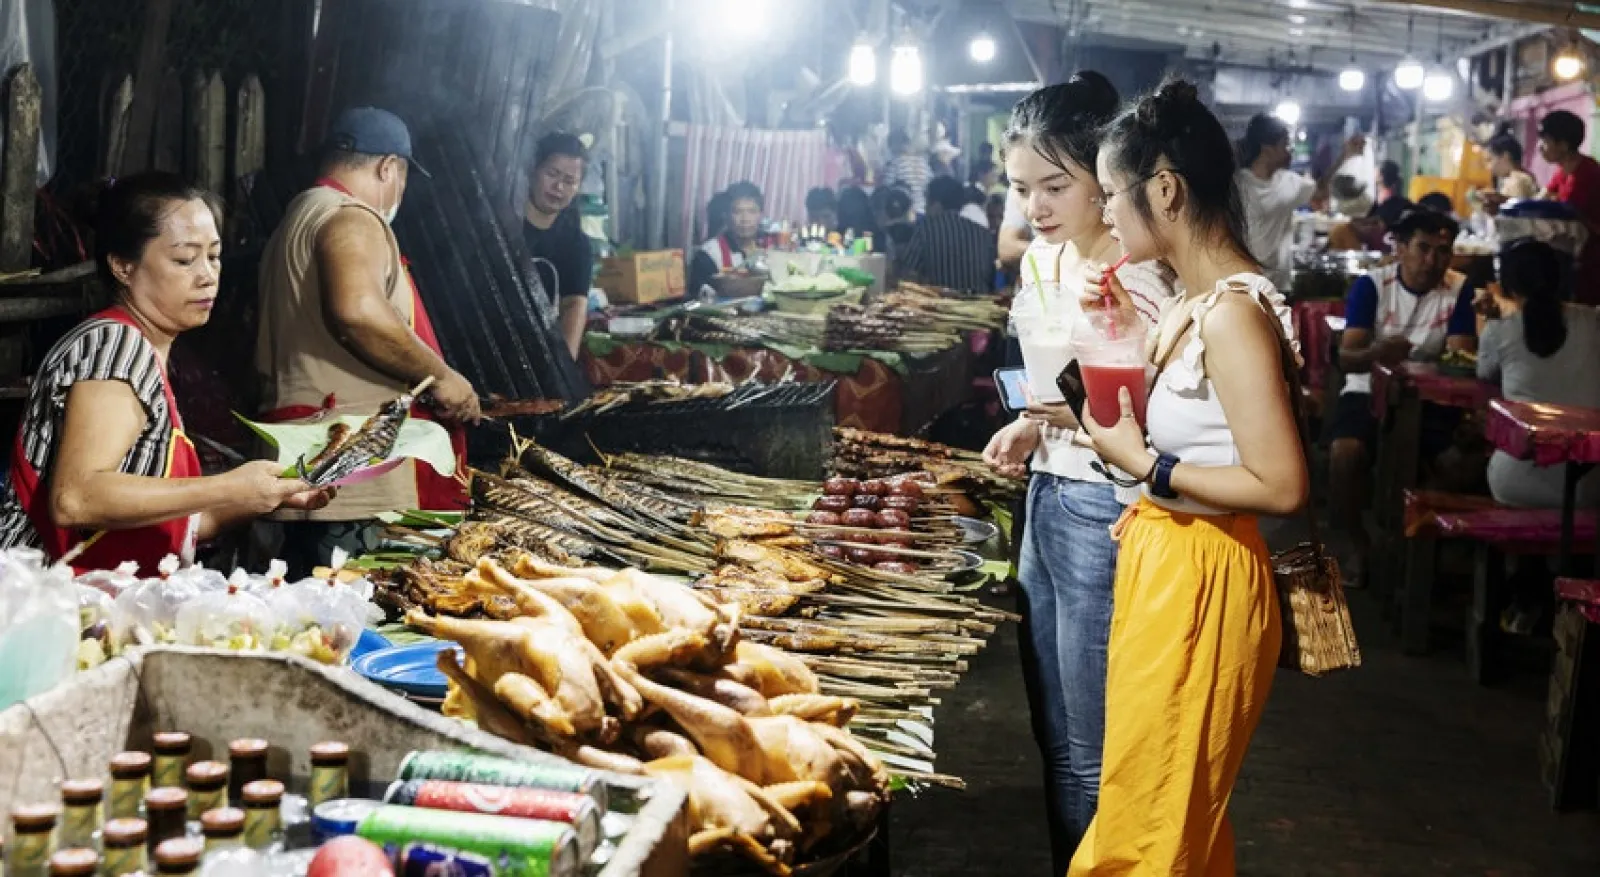 A busy street food market in Laos shows two people shopping for food